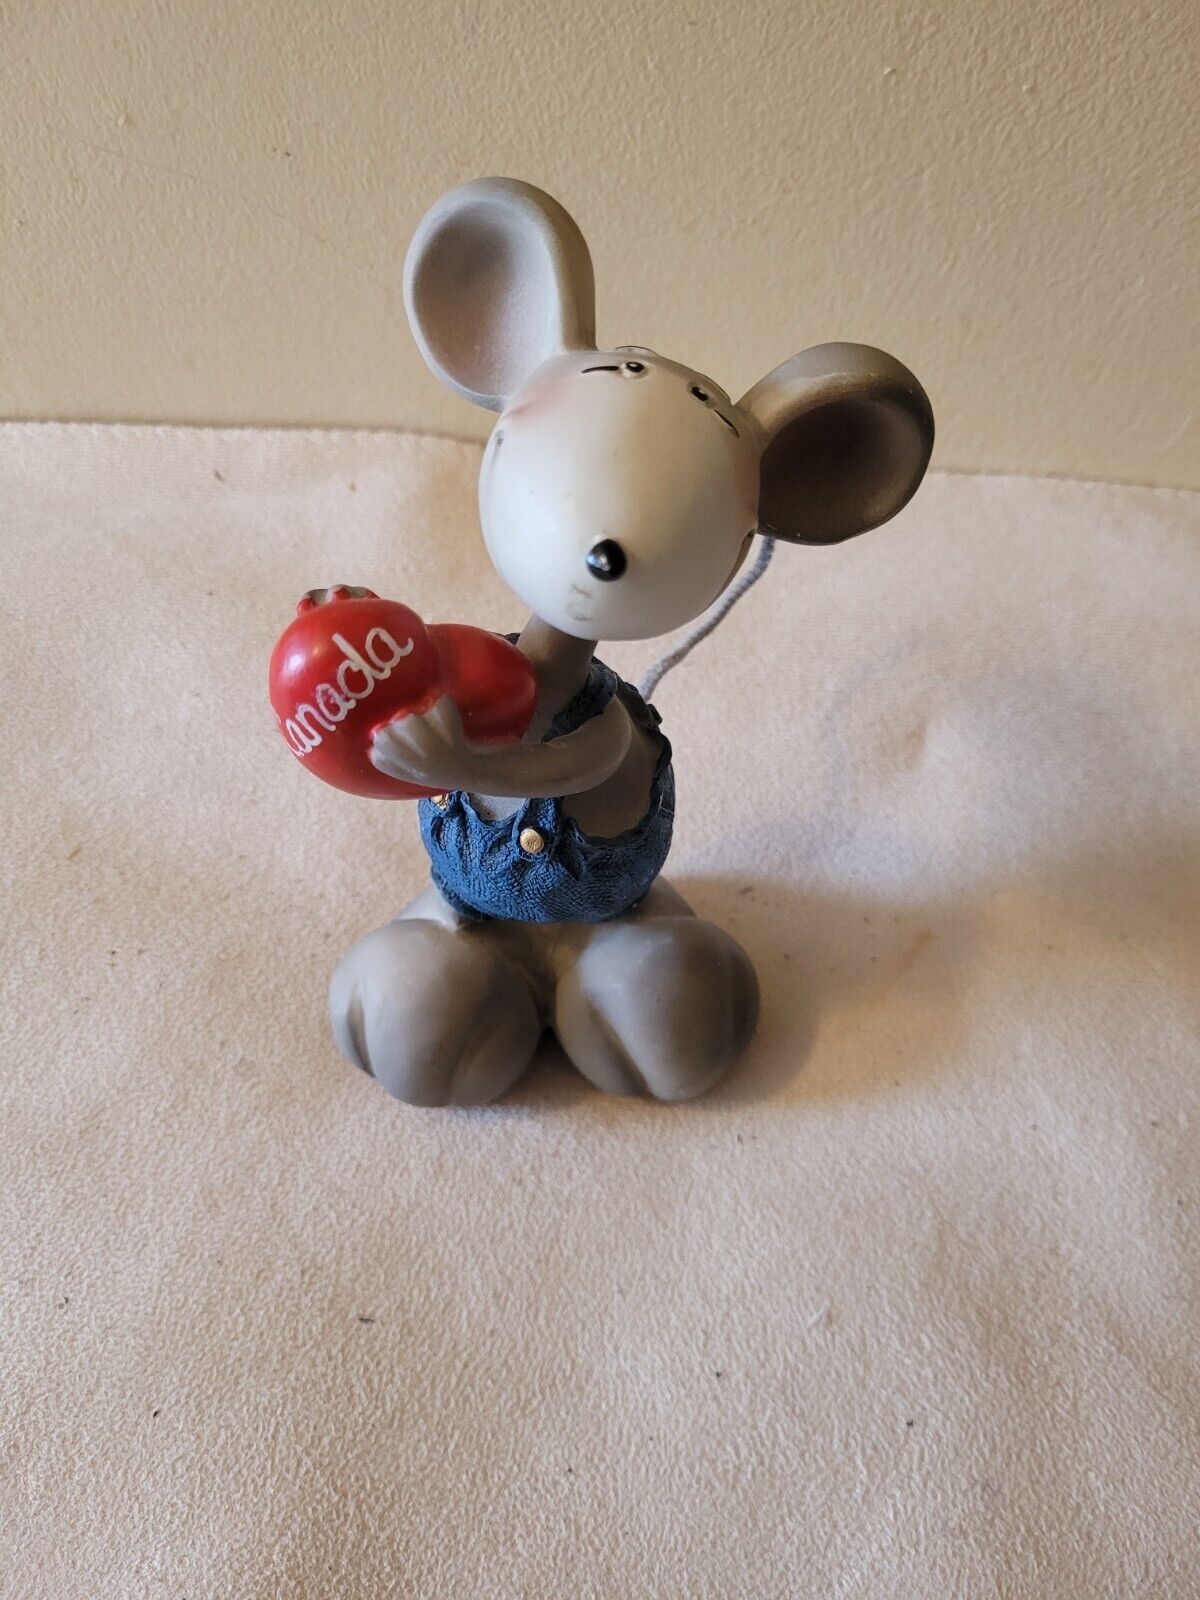 Rare Mouse Bobble Head Resin Figurine - Canada Heart- Mouse With Big Foot